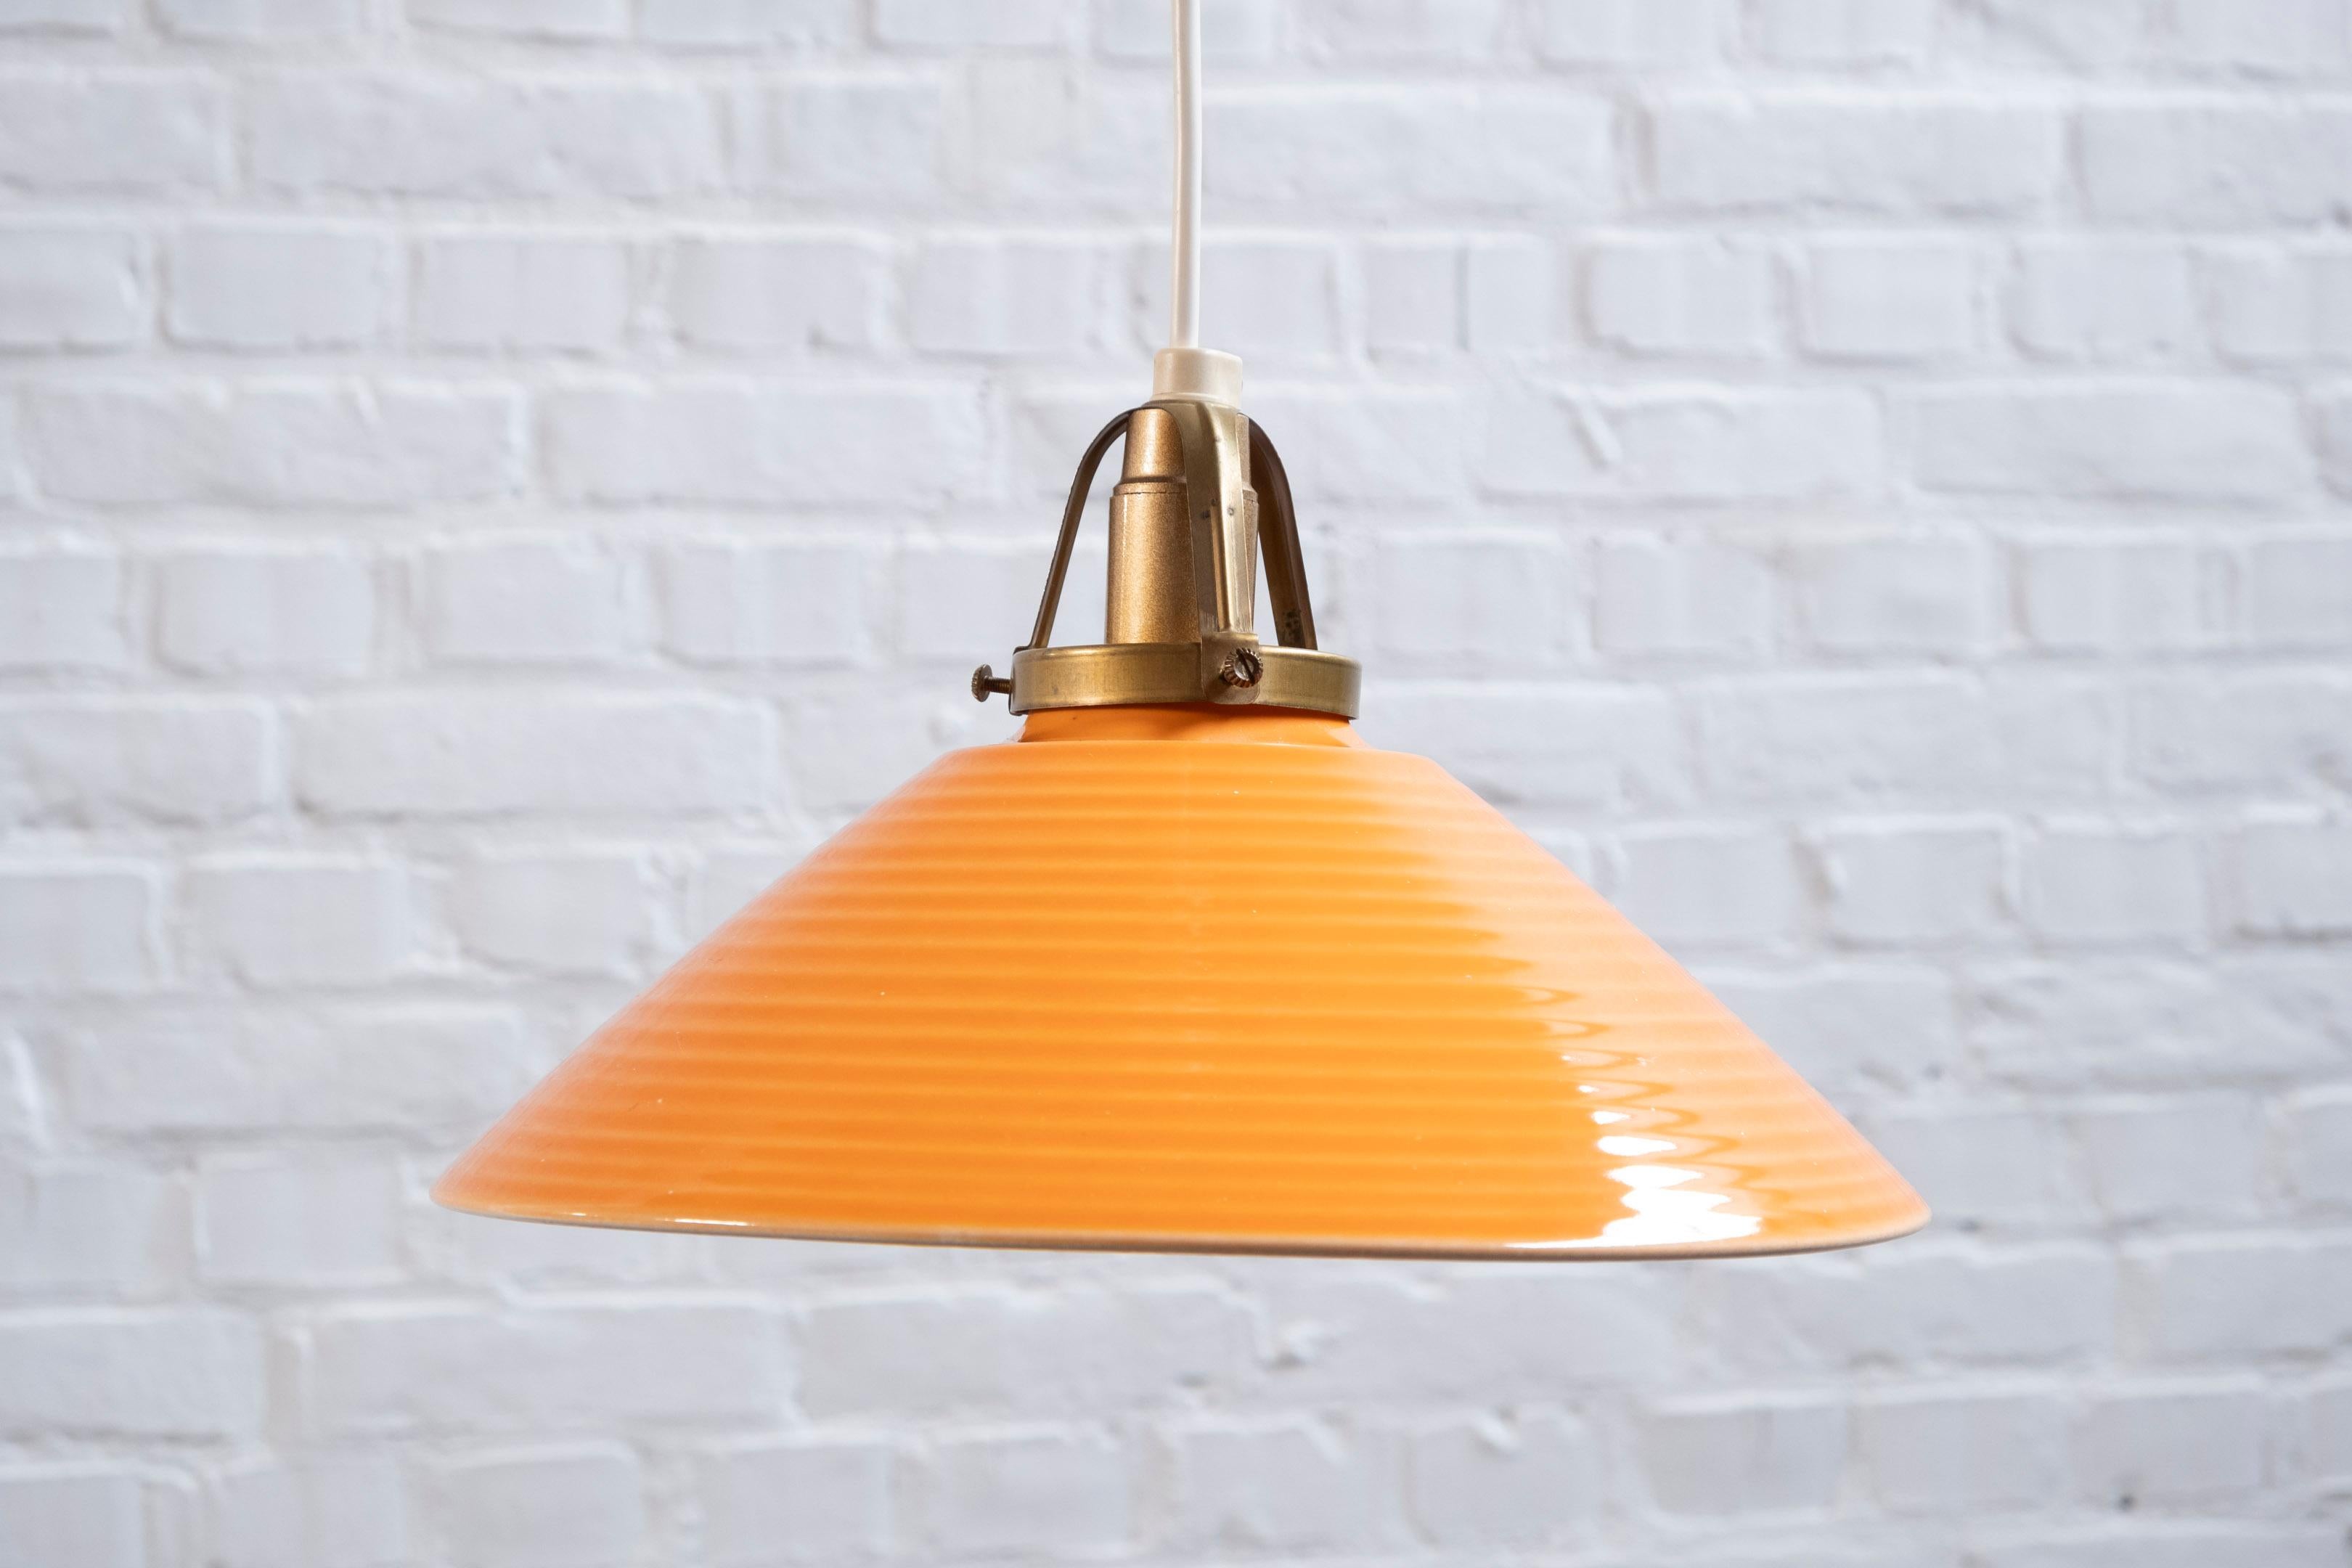 Orange ceramic lamp by Søholm, made in the 1960's in Denmark.
Beautiful brass details and wonderful ceramic and glaze.

Width: 27 centimetres
Height: 16 centimetres

Very good vintage condition, has been rewired.